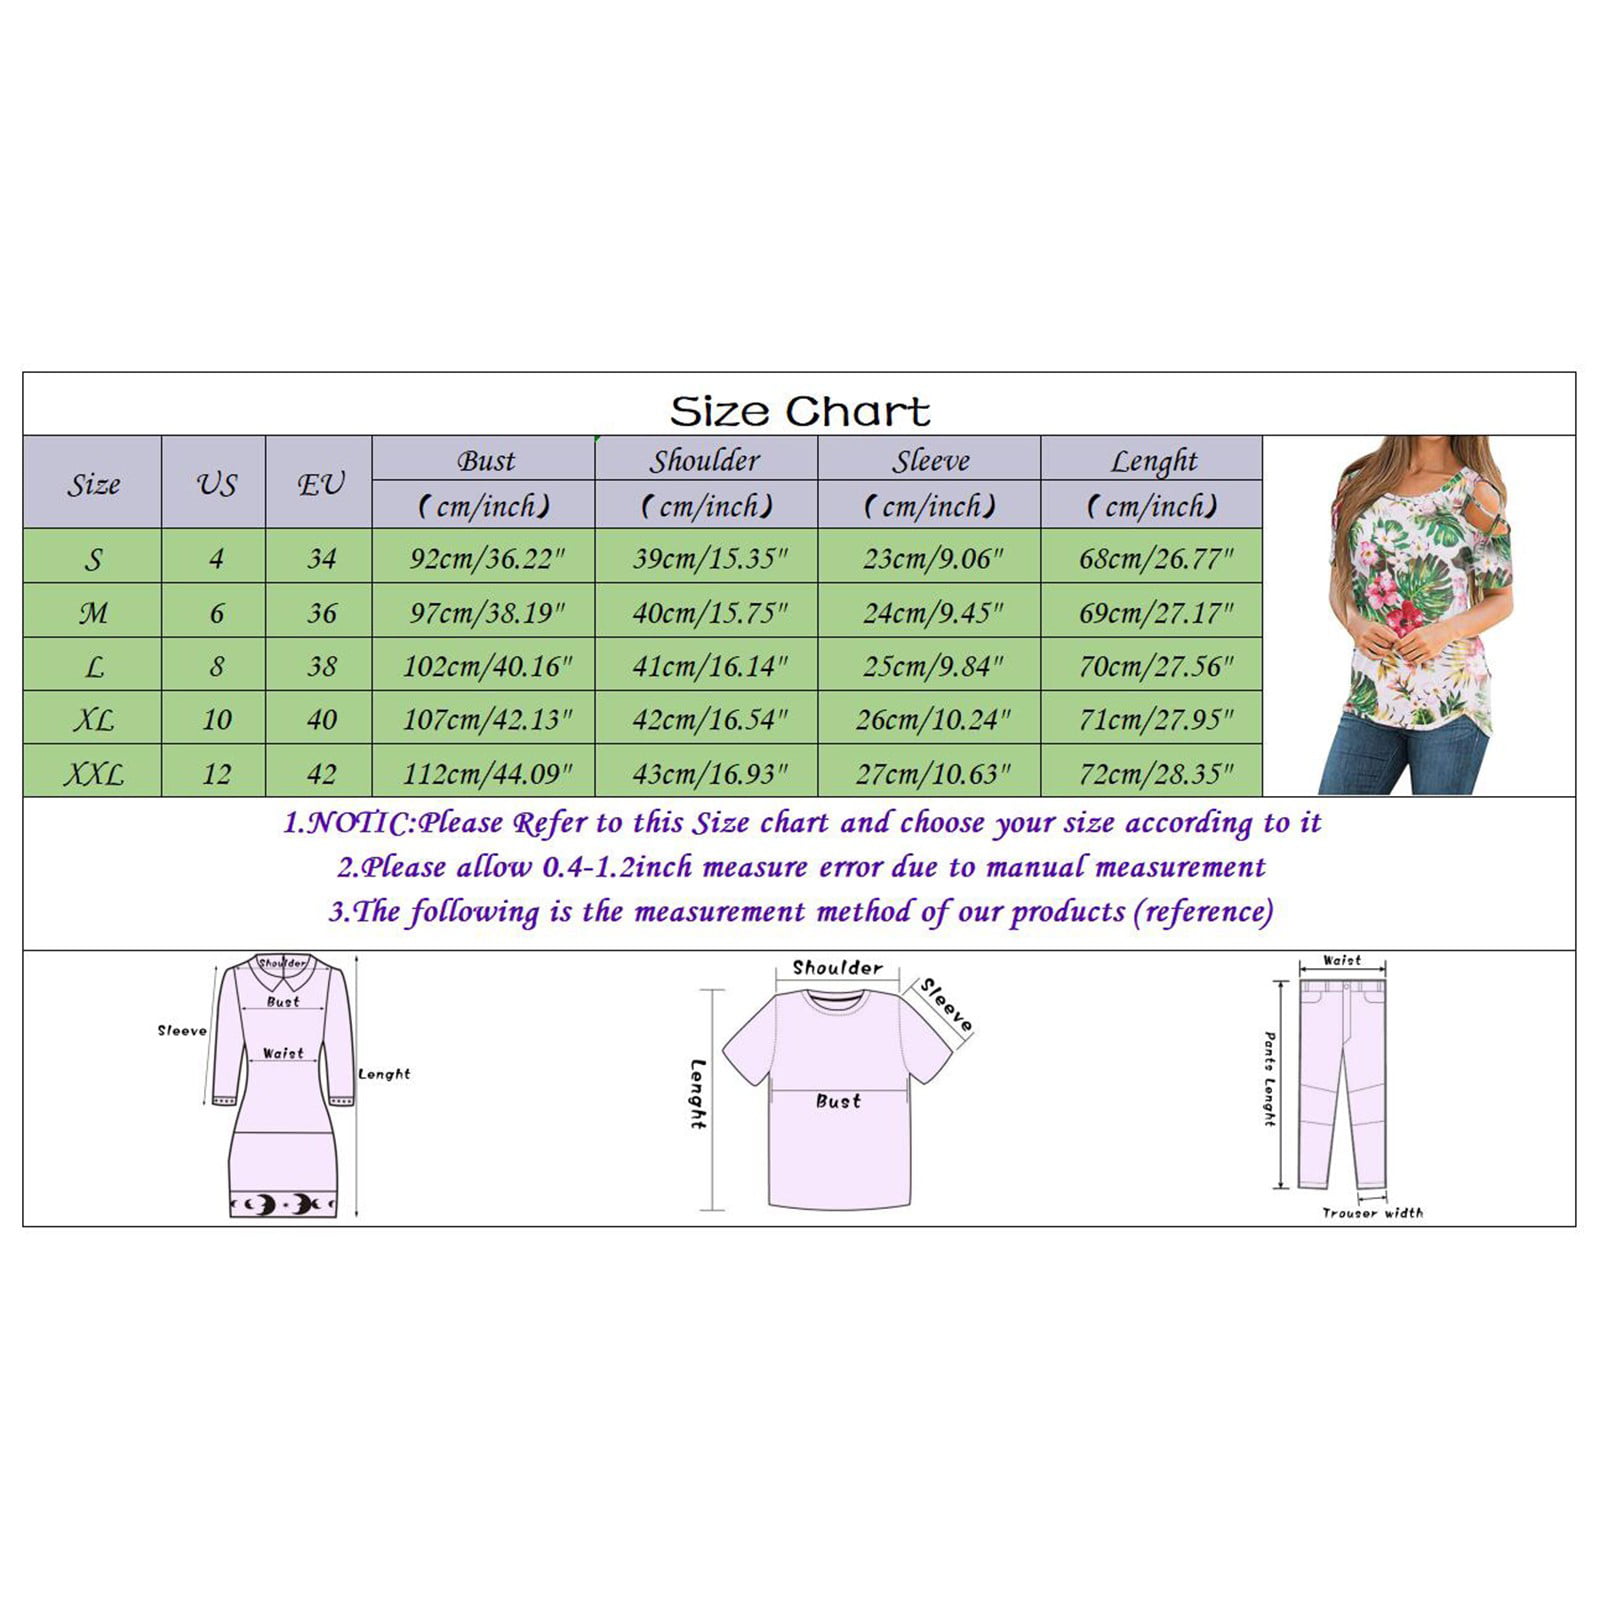 Nkoogh Overnight Delivery Items Prime Womens Clothes Tee Shirt Women Women Floral Printed Short Sleeve Strappy Cold Shoulder T Shirt Tops Blouses